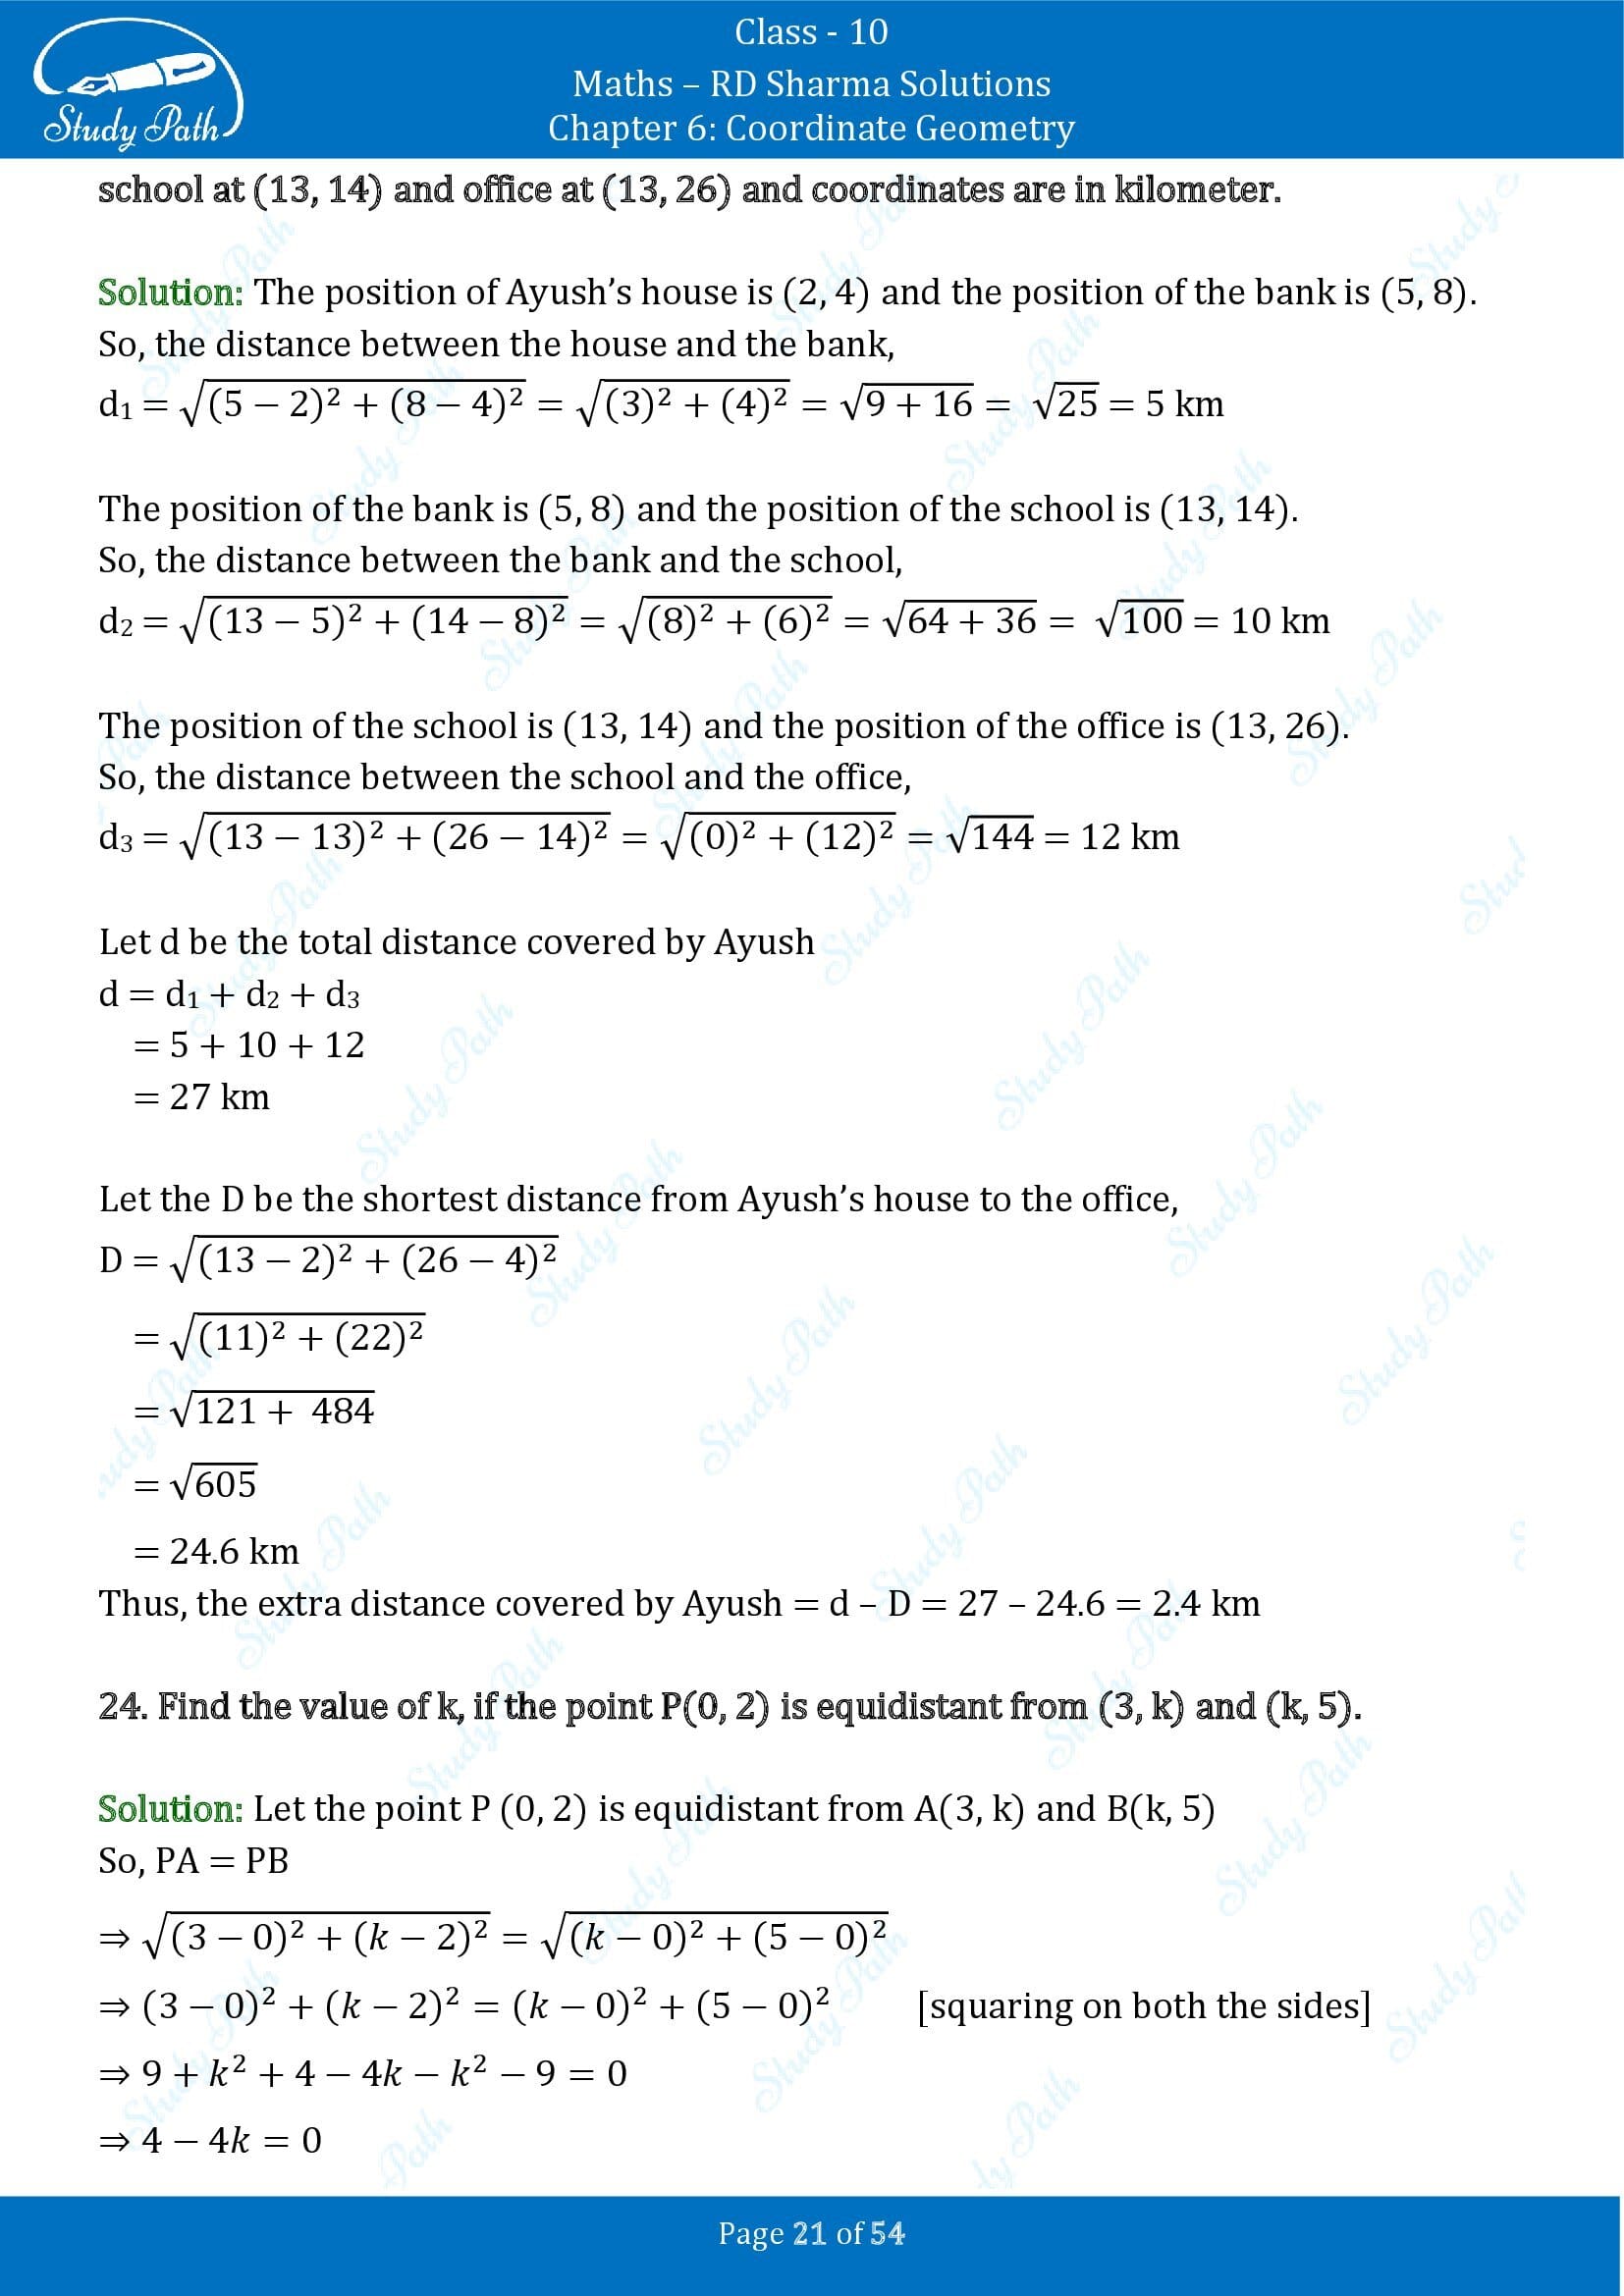 RD Sharma Solutions Class 10 Chapter 6 Coordinate Geometry Exercise 6.2 0021